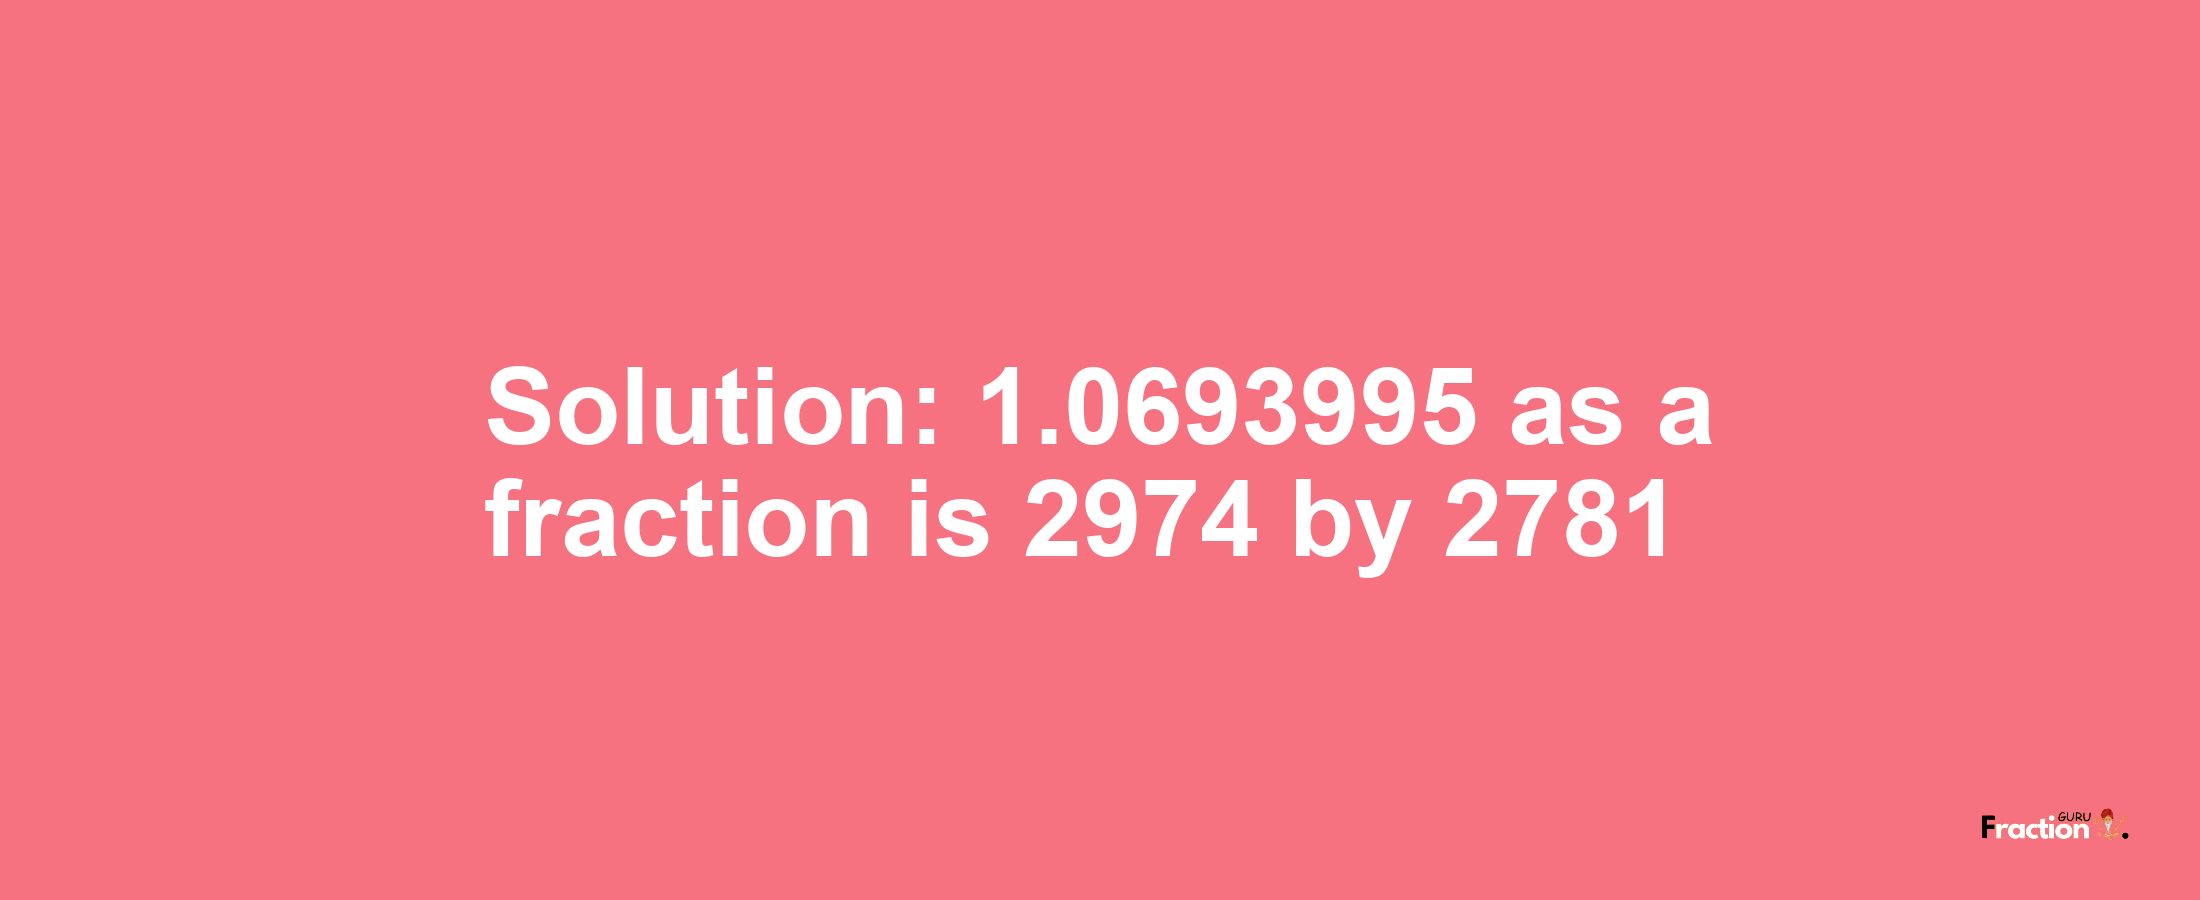 Solution:1.0693995 as a fraction is 2974/2781